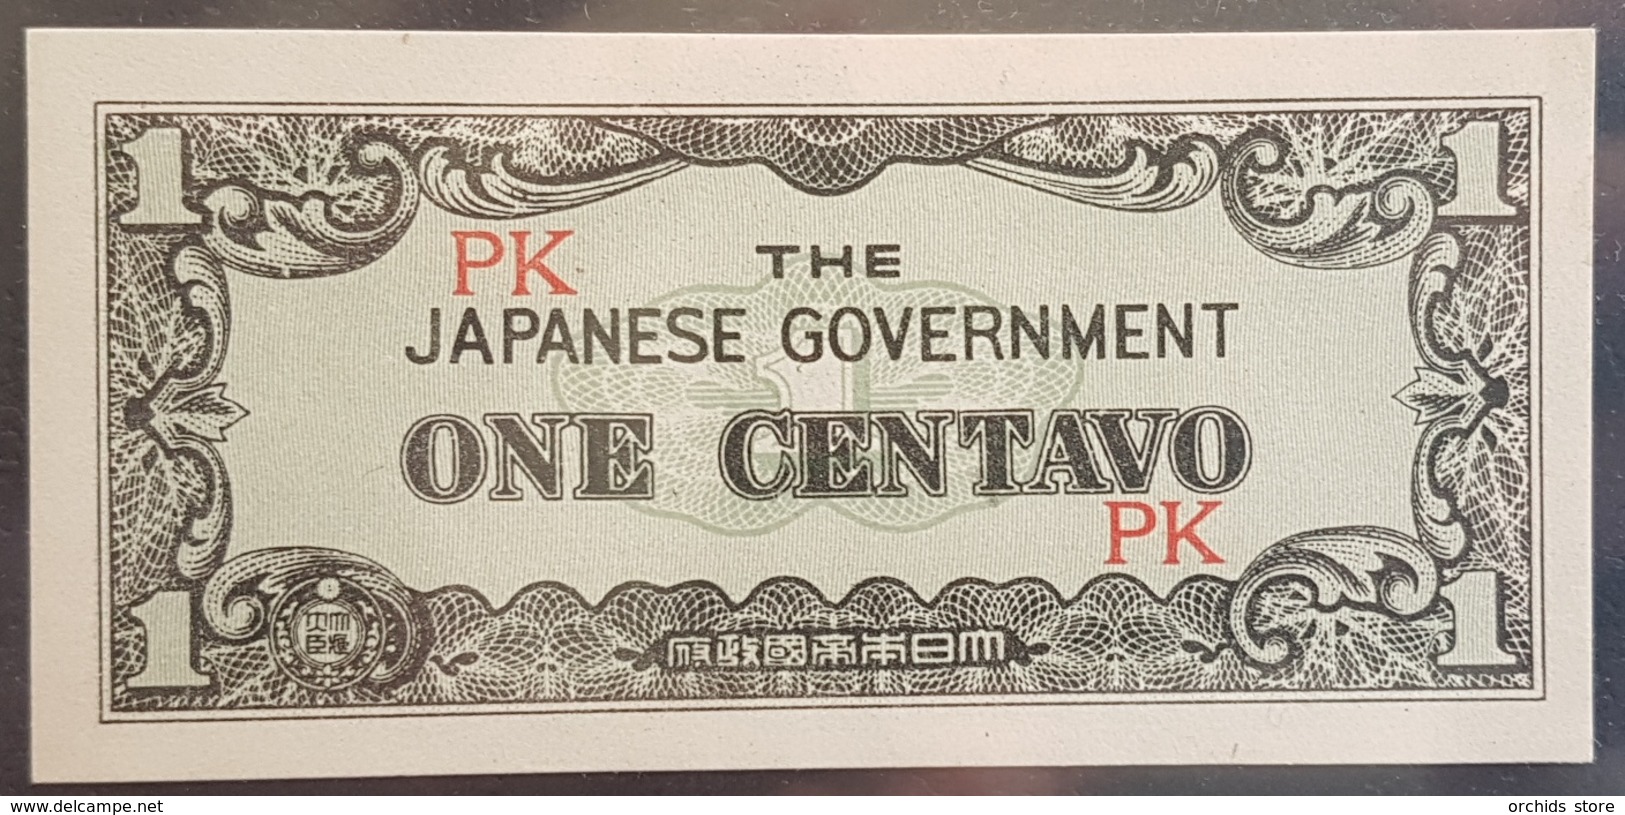 EBN7 - The Japanese Military Government In Philippines - 1942 Banknote 1 Centavo Series PK - Pick 102 - UNC - Japon